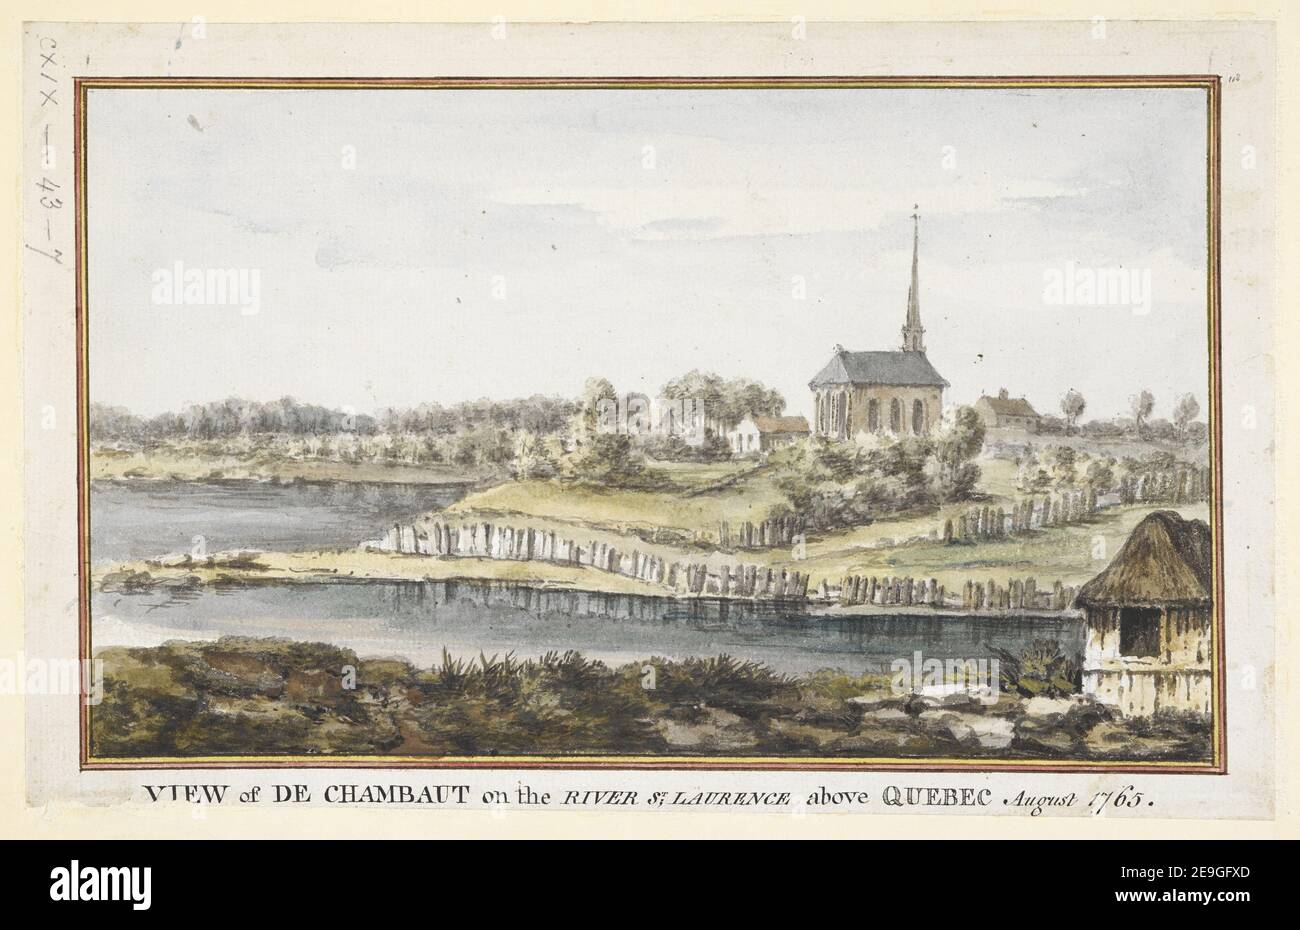 VIEW of DE CHAMBAUT on the RIVER St LAURENCE above QUEBEC. Author  Gordon, Adam 119.43.7. Date of publication: August 1765.  Item type: 1 drawing Medium: watercolour Dimensions: sheet 19.5 x 31 cm  Former owner: George III, King of Great Britain, 1738-1820 Stock Photo